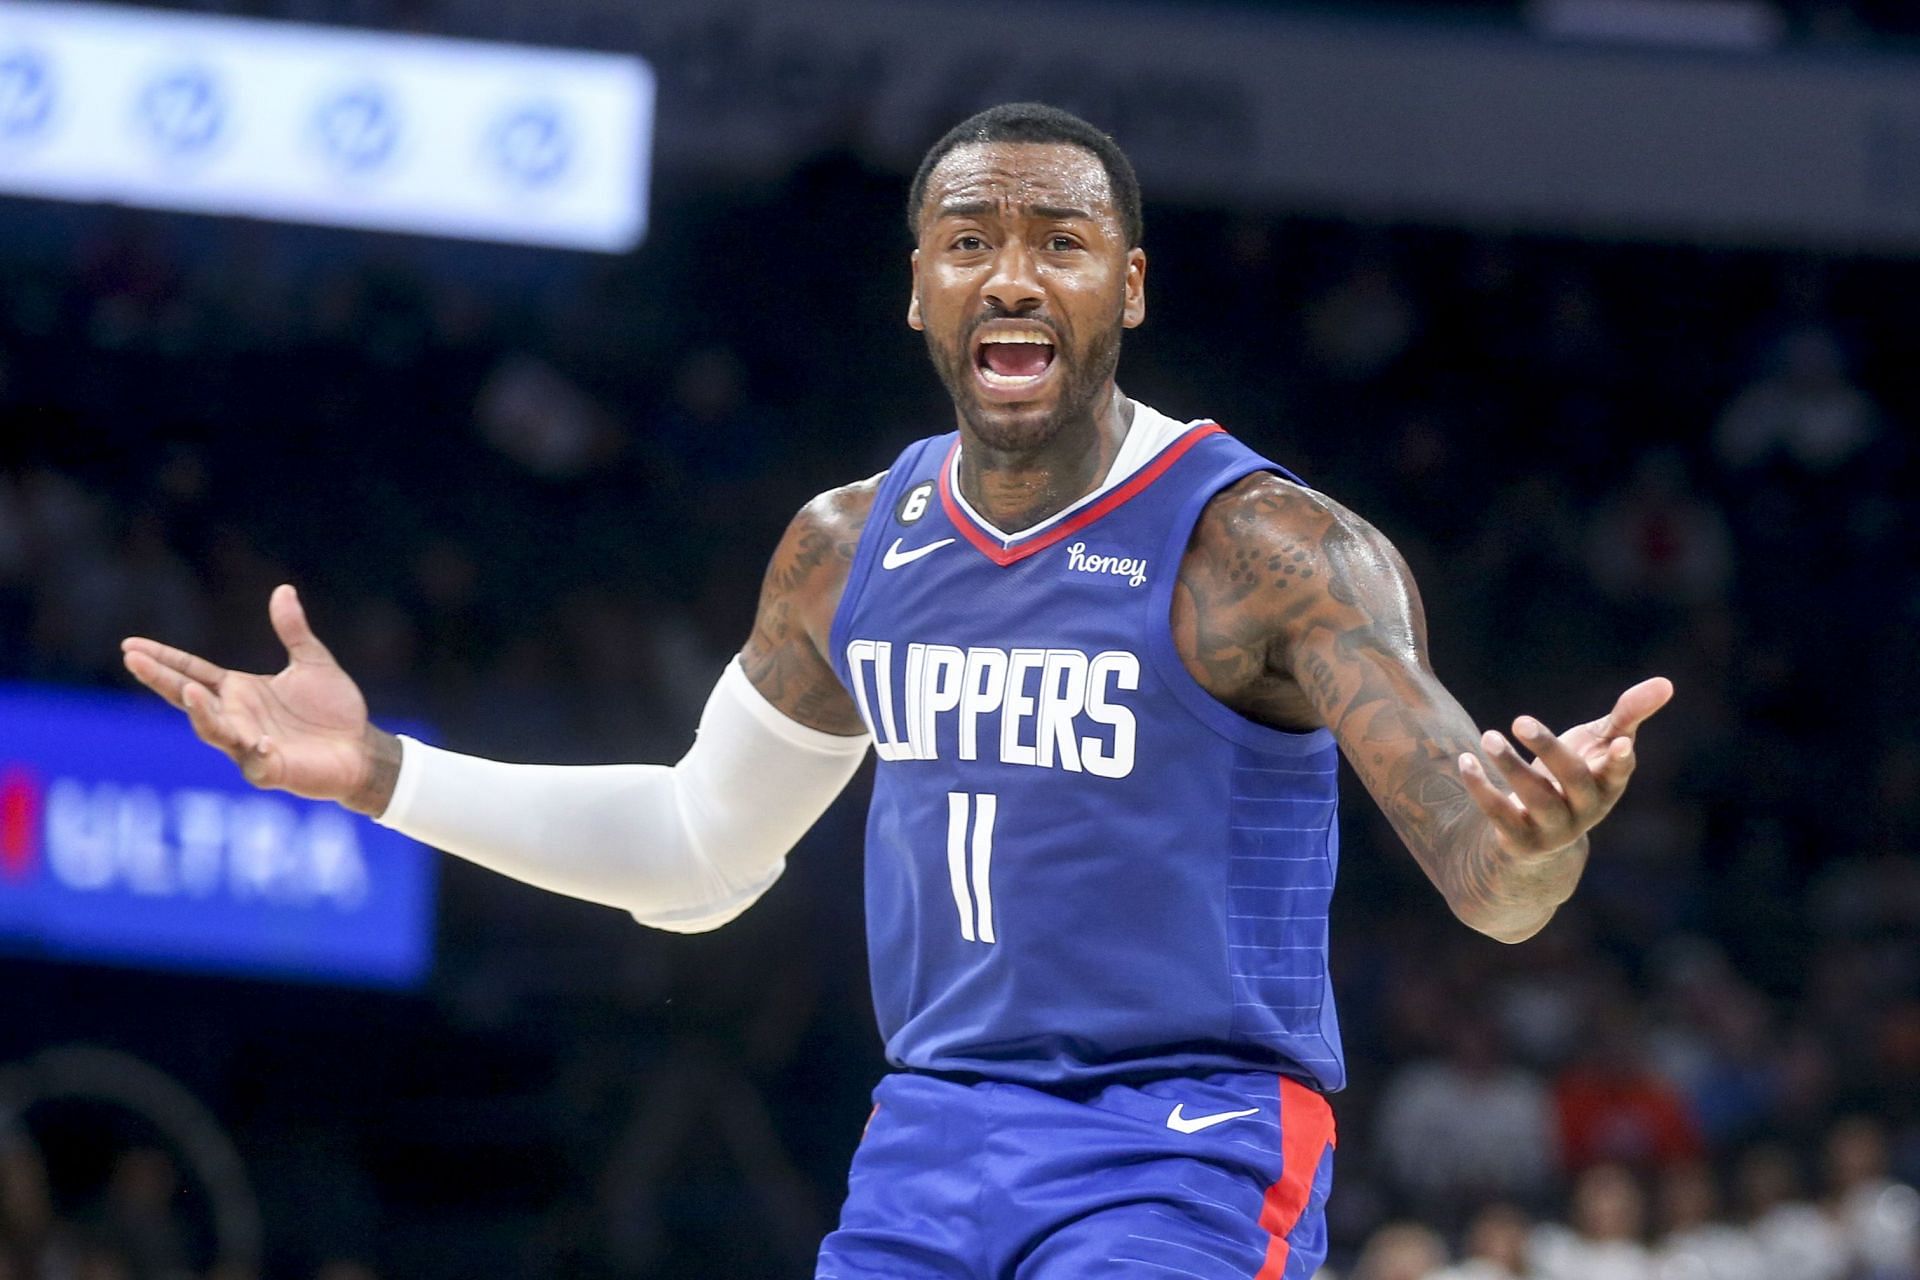 Rockets: What's going on with John Wall?